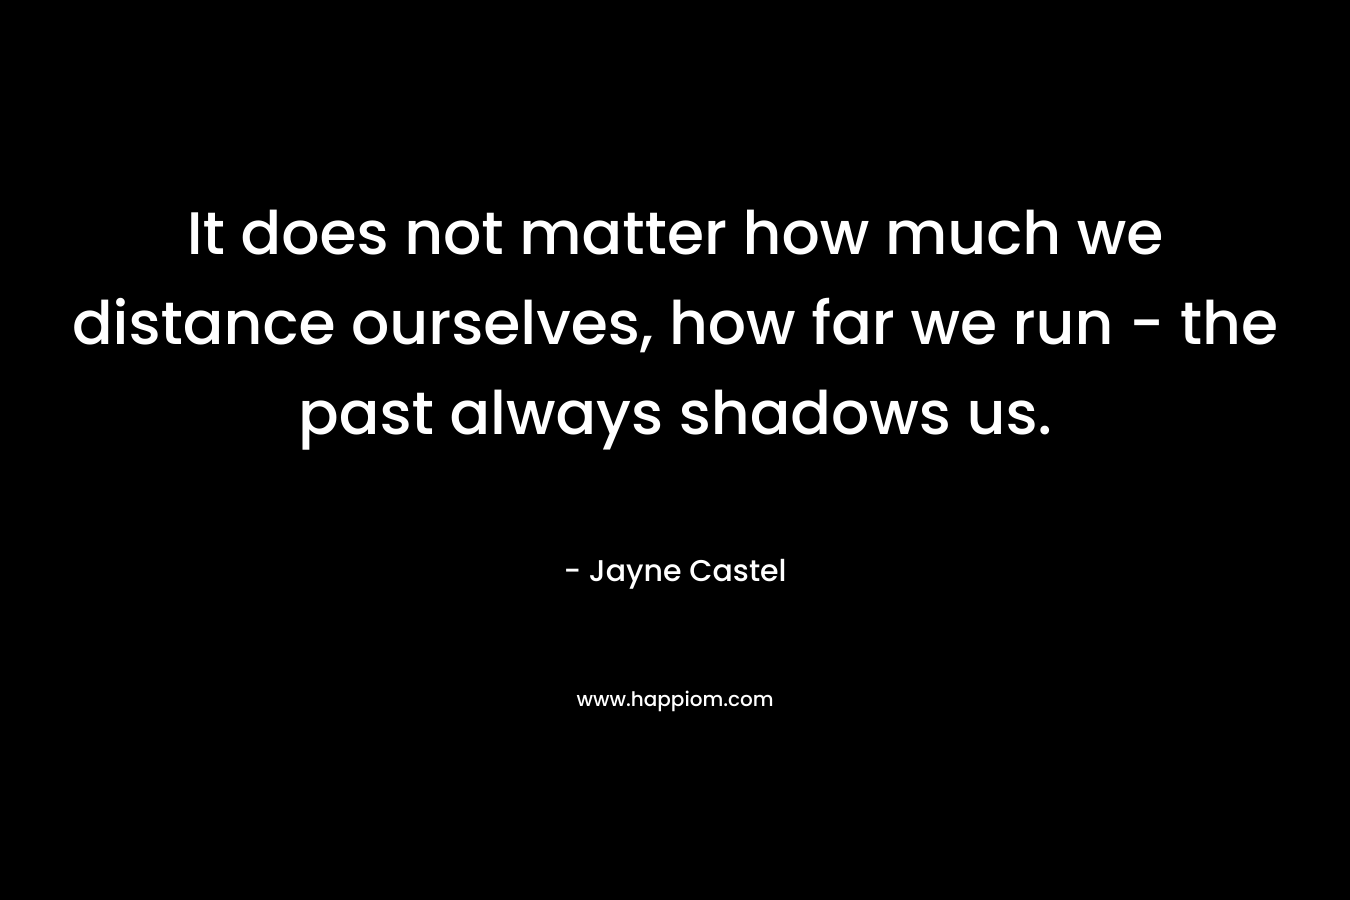 It does not matter how much we distance ourselves, how far we run - the past always shadows us.